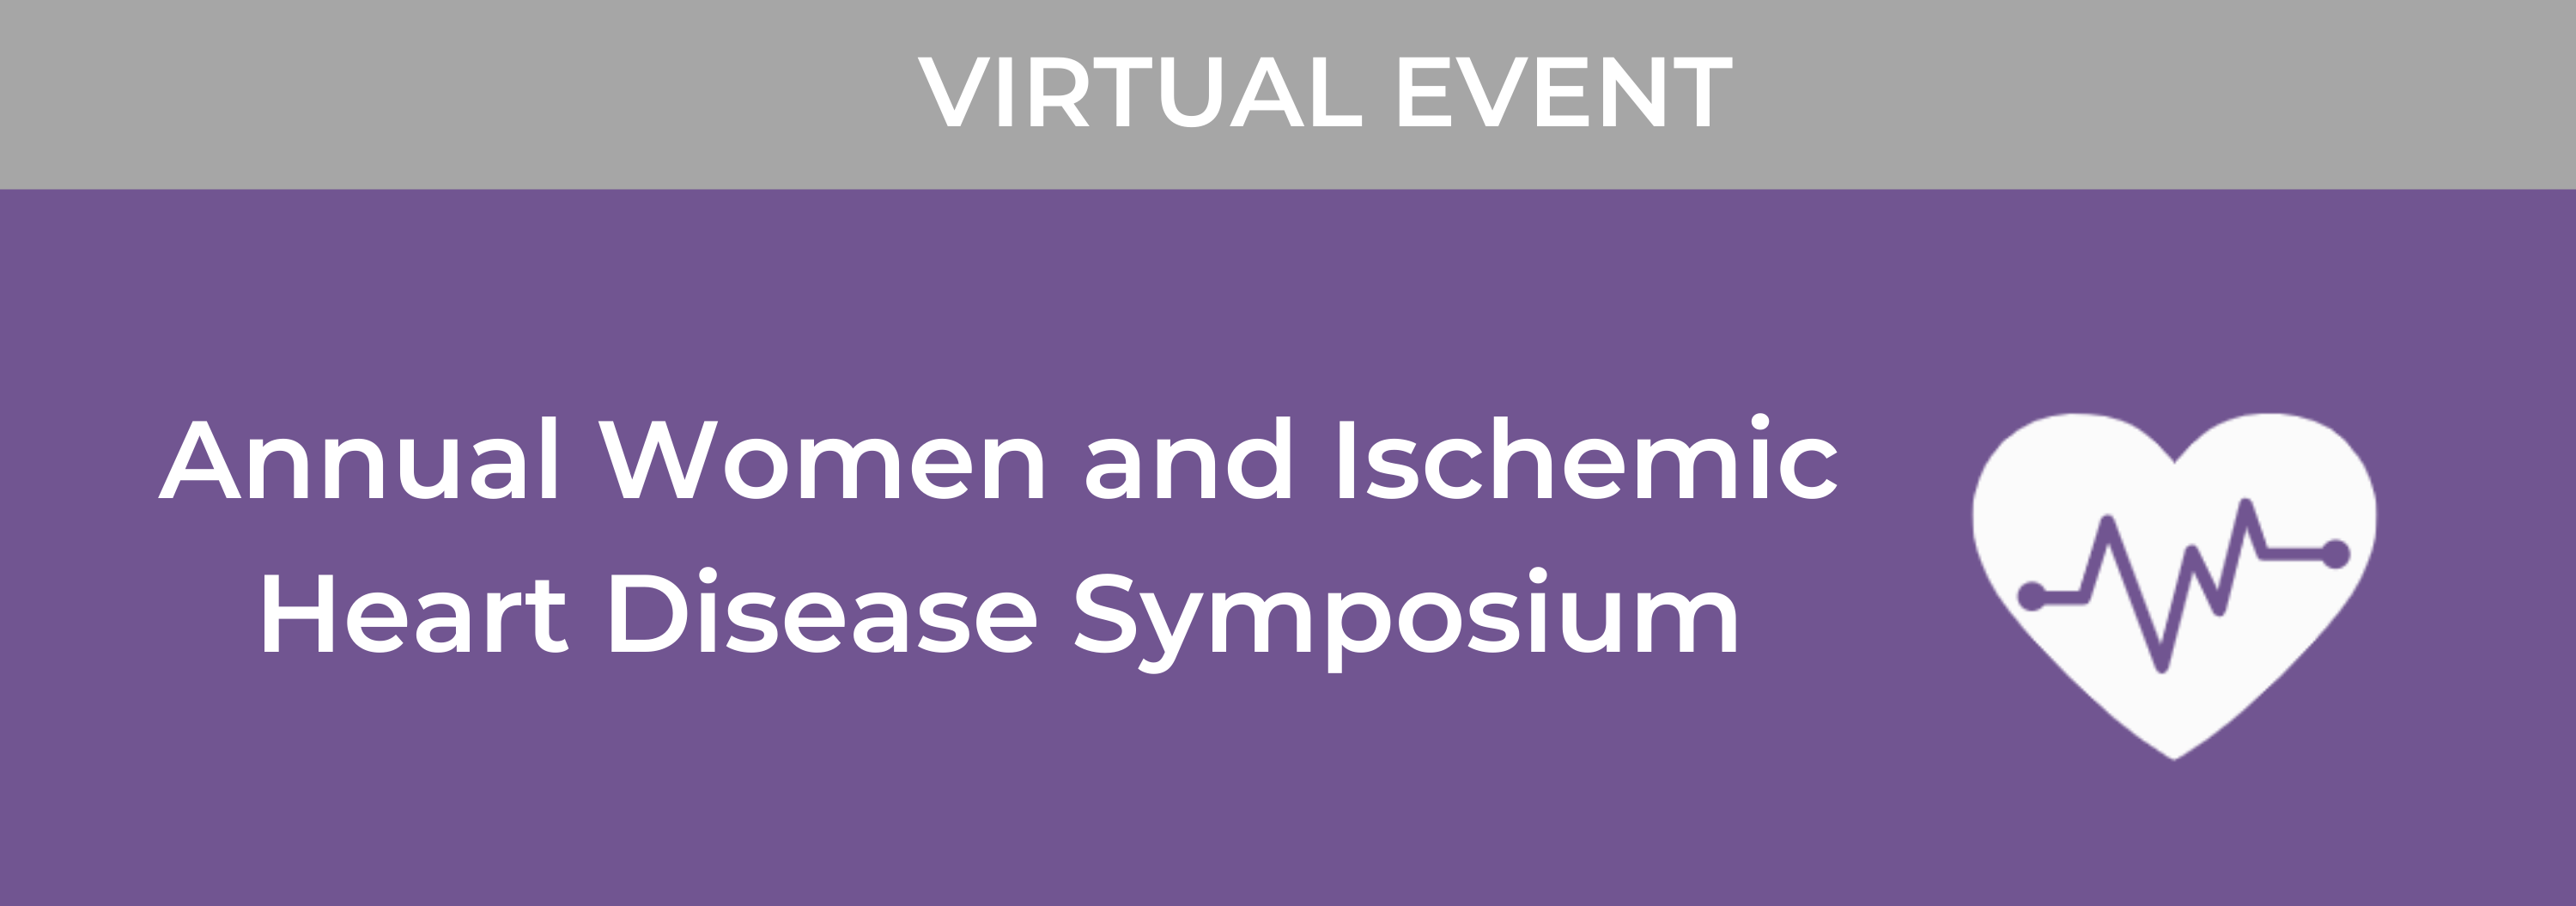 15th Annual Women and Ischemic Heart Disease Symposium Banner